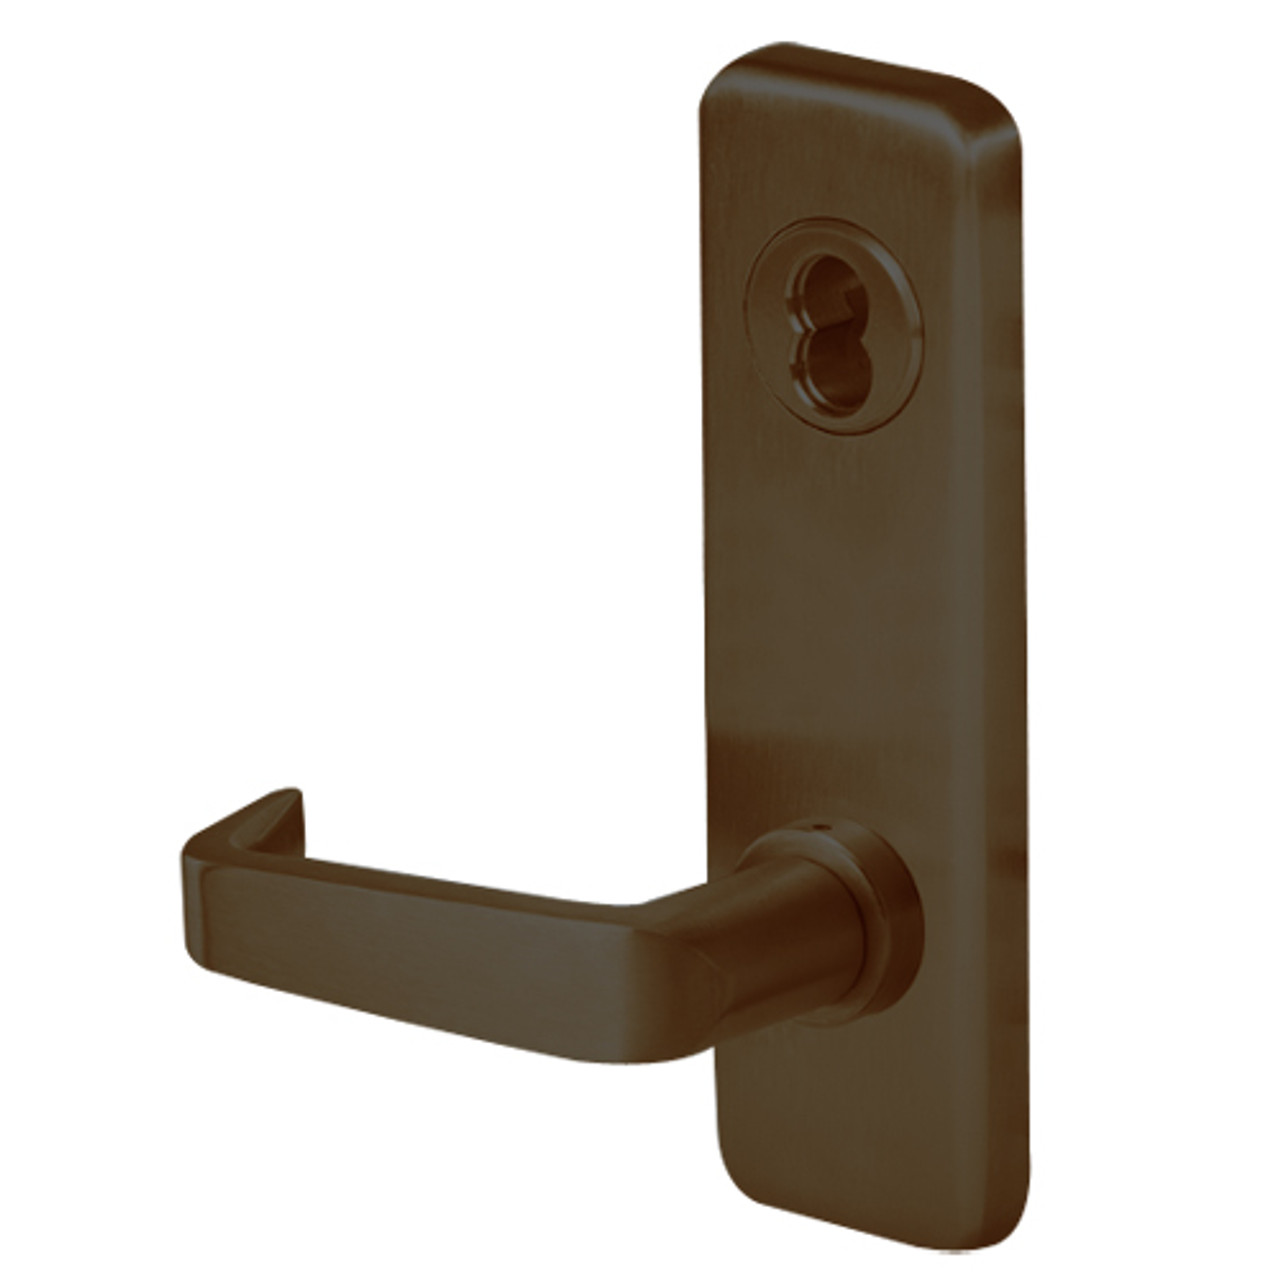 45H0N15J613 Best 40H Series Passage Heavy Duty Mortise Lever Lock with Contour with Angle Return Style in Oil Rubbed Bronze